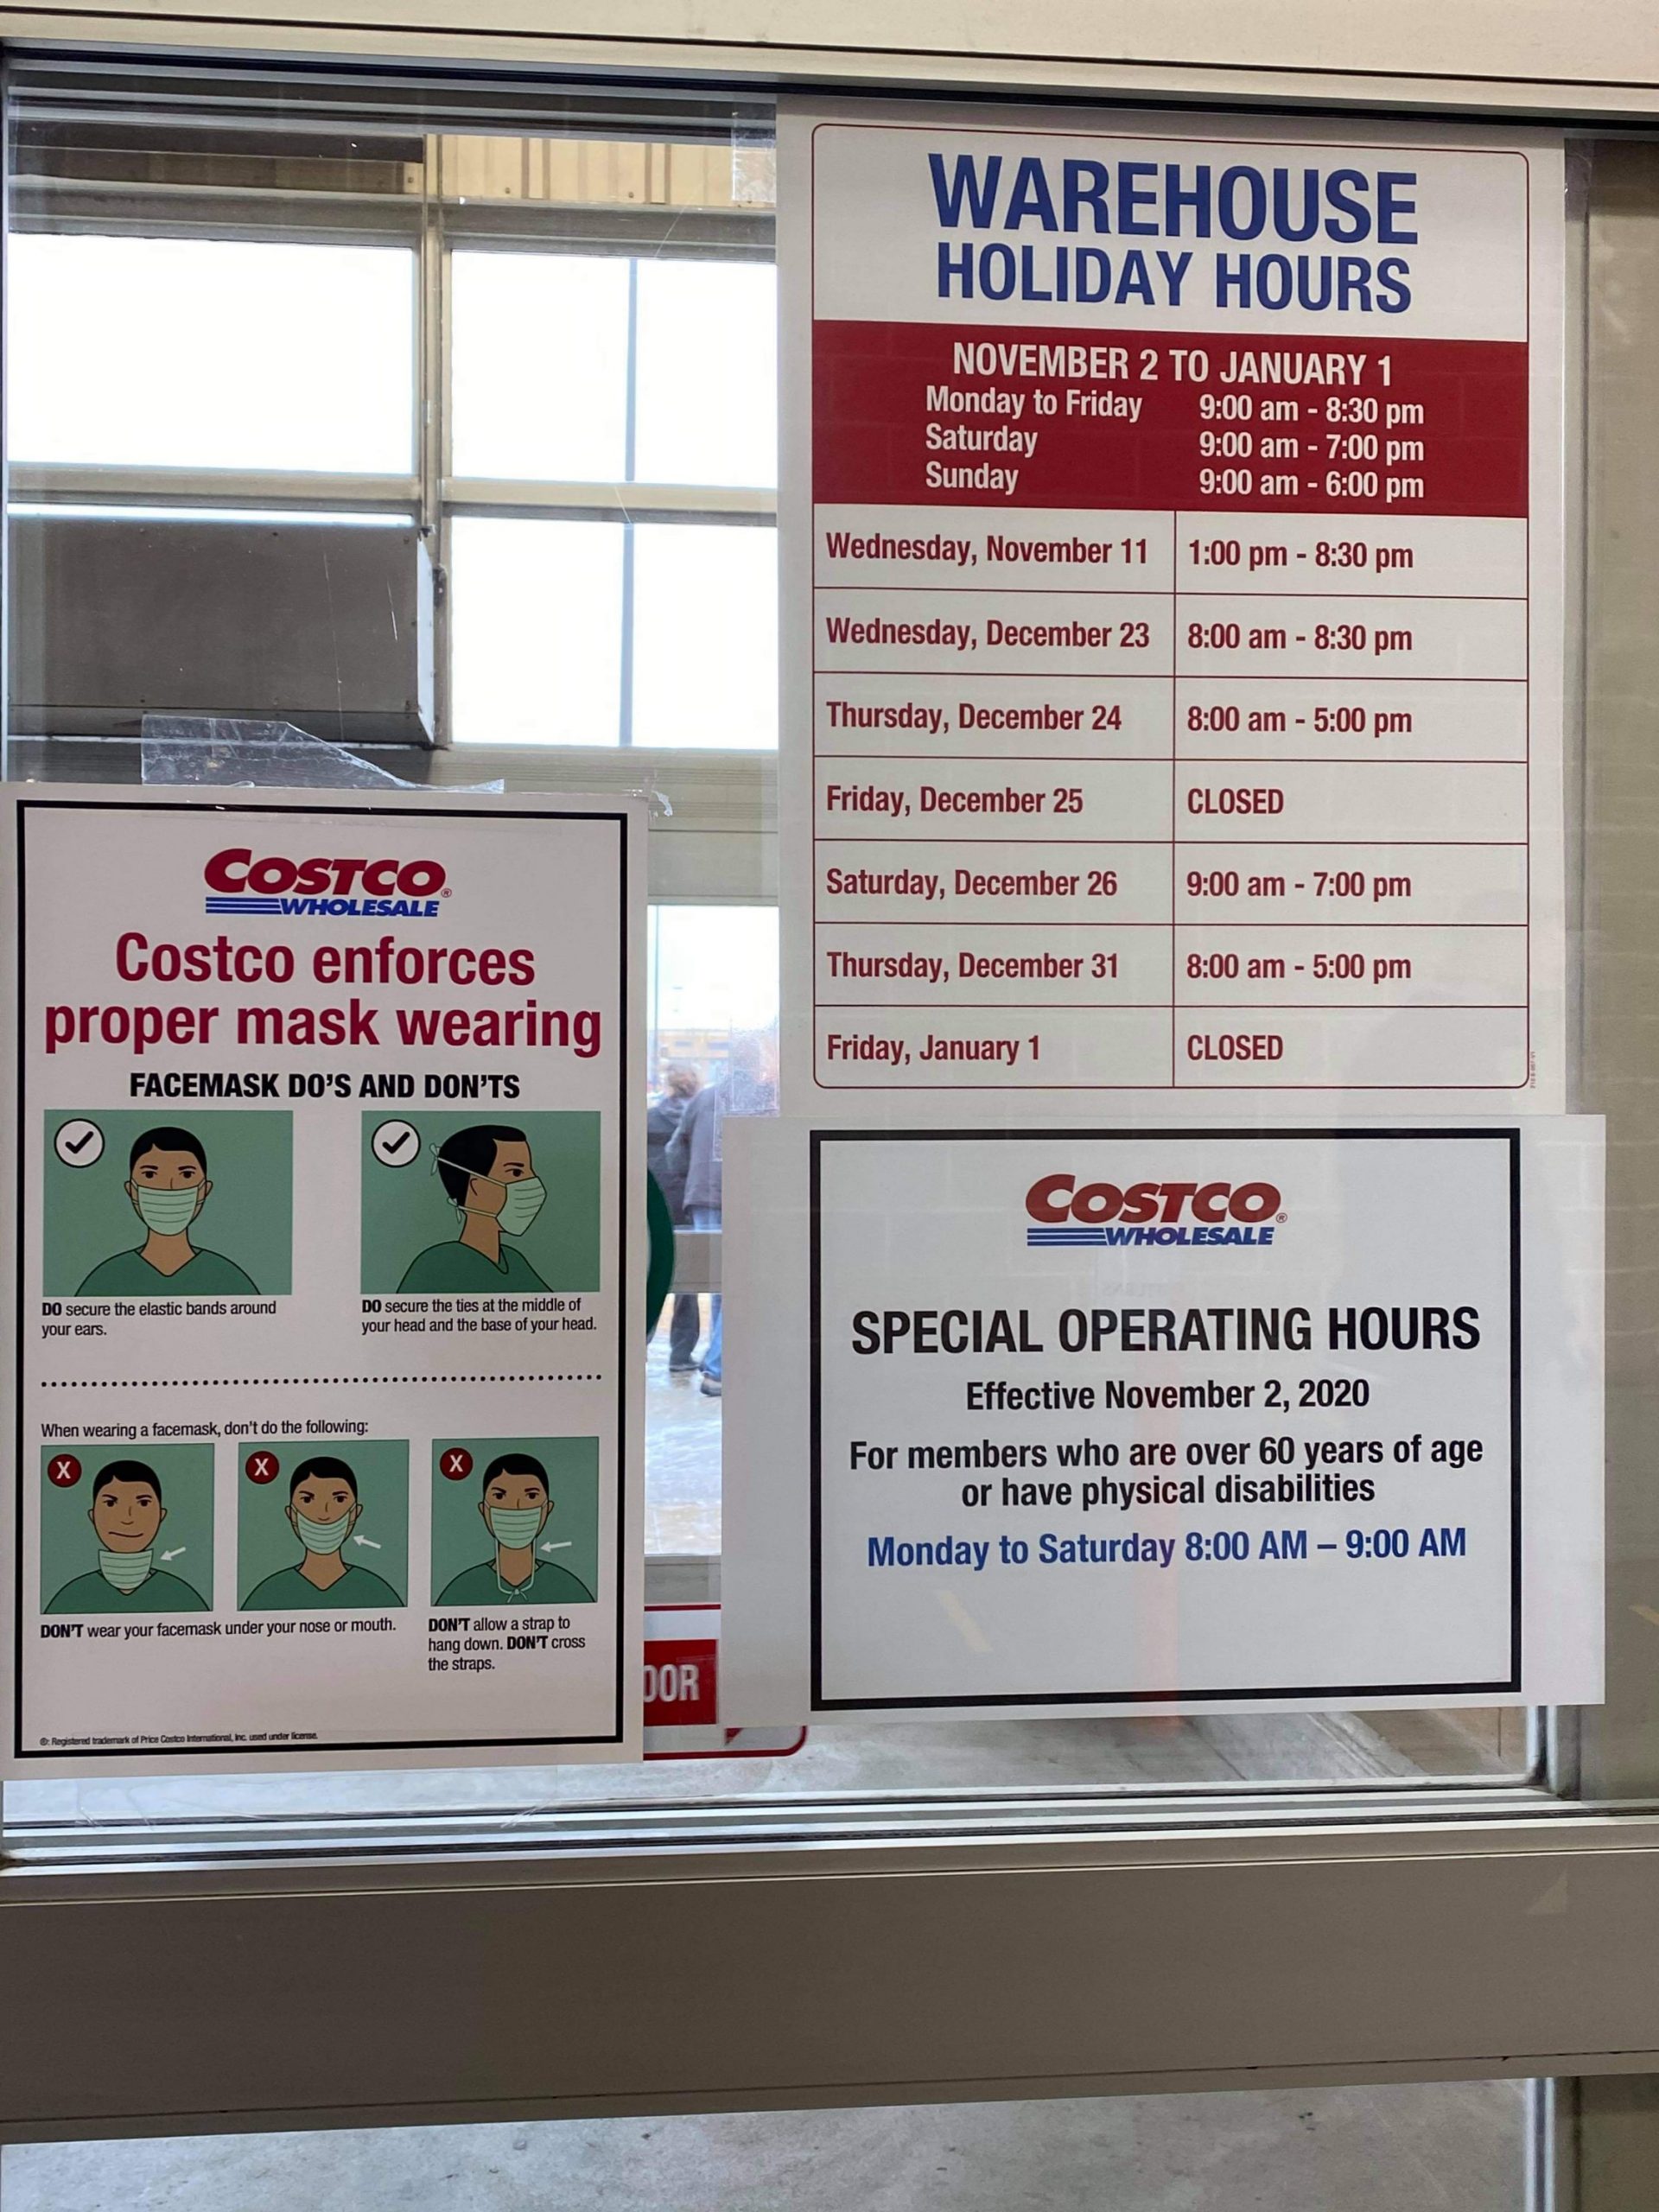 Costco senior hours are back!! And holiday hours too! Save Money in